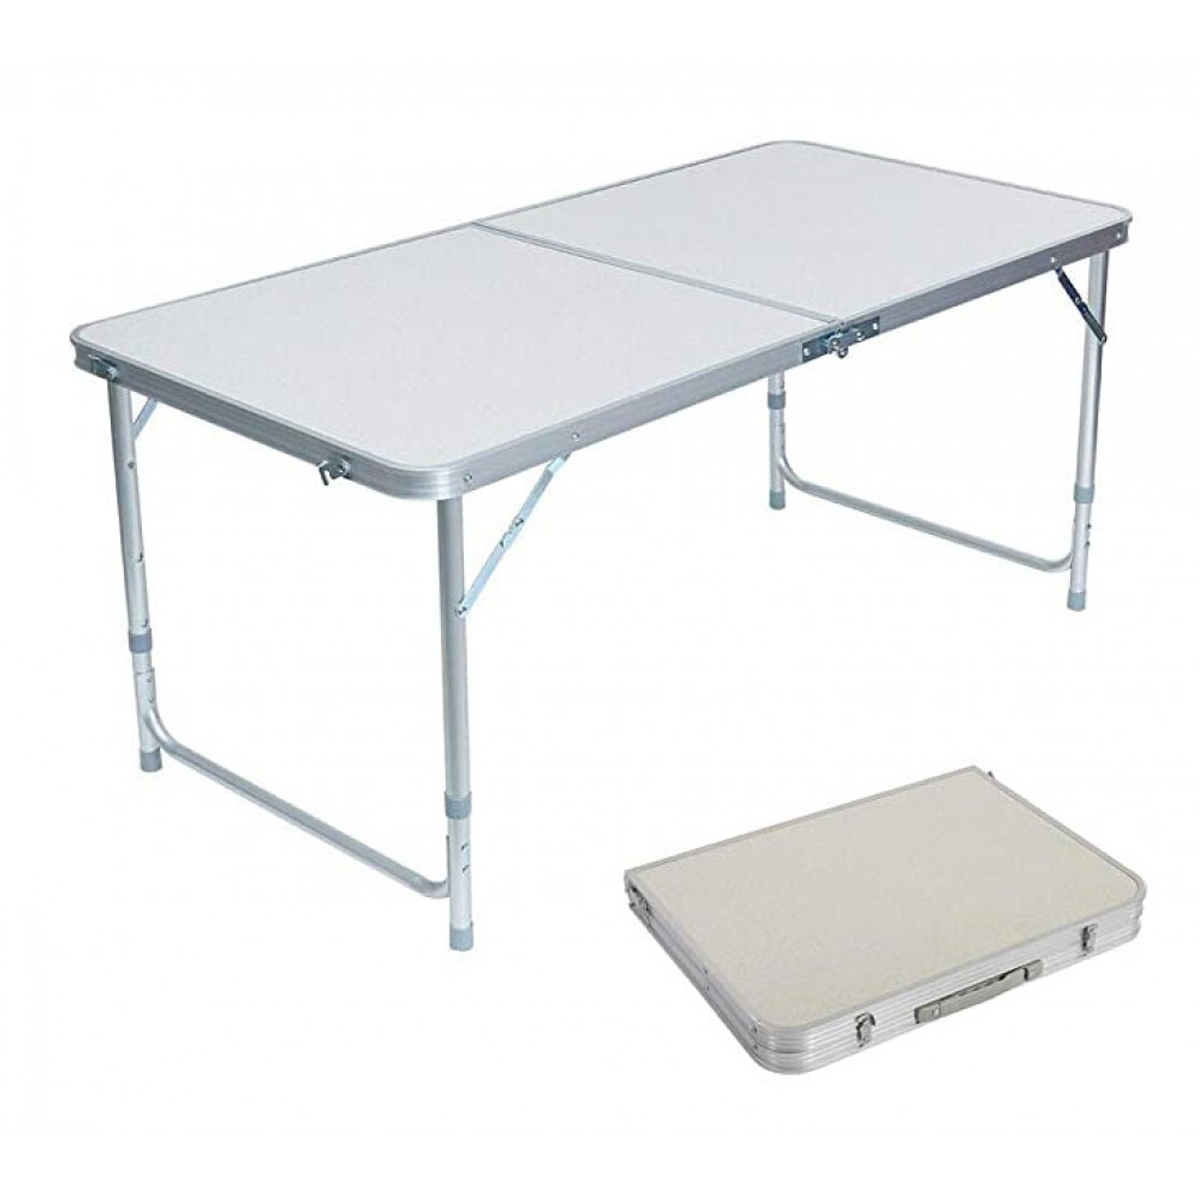 Procamp Foldable Dining Table Size 120x60x70 Cms